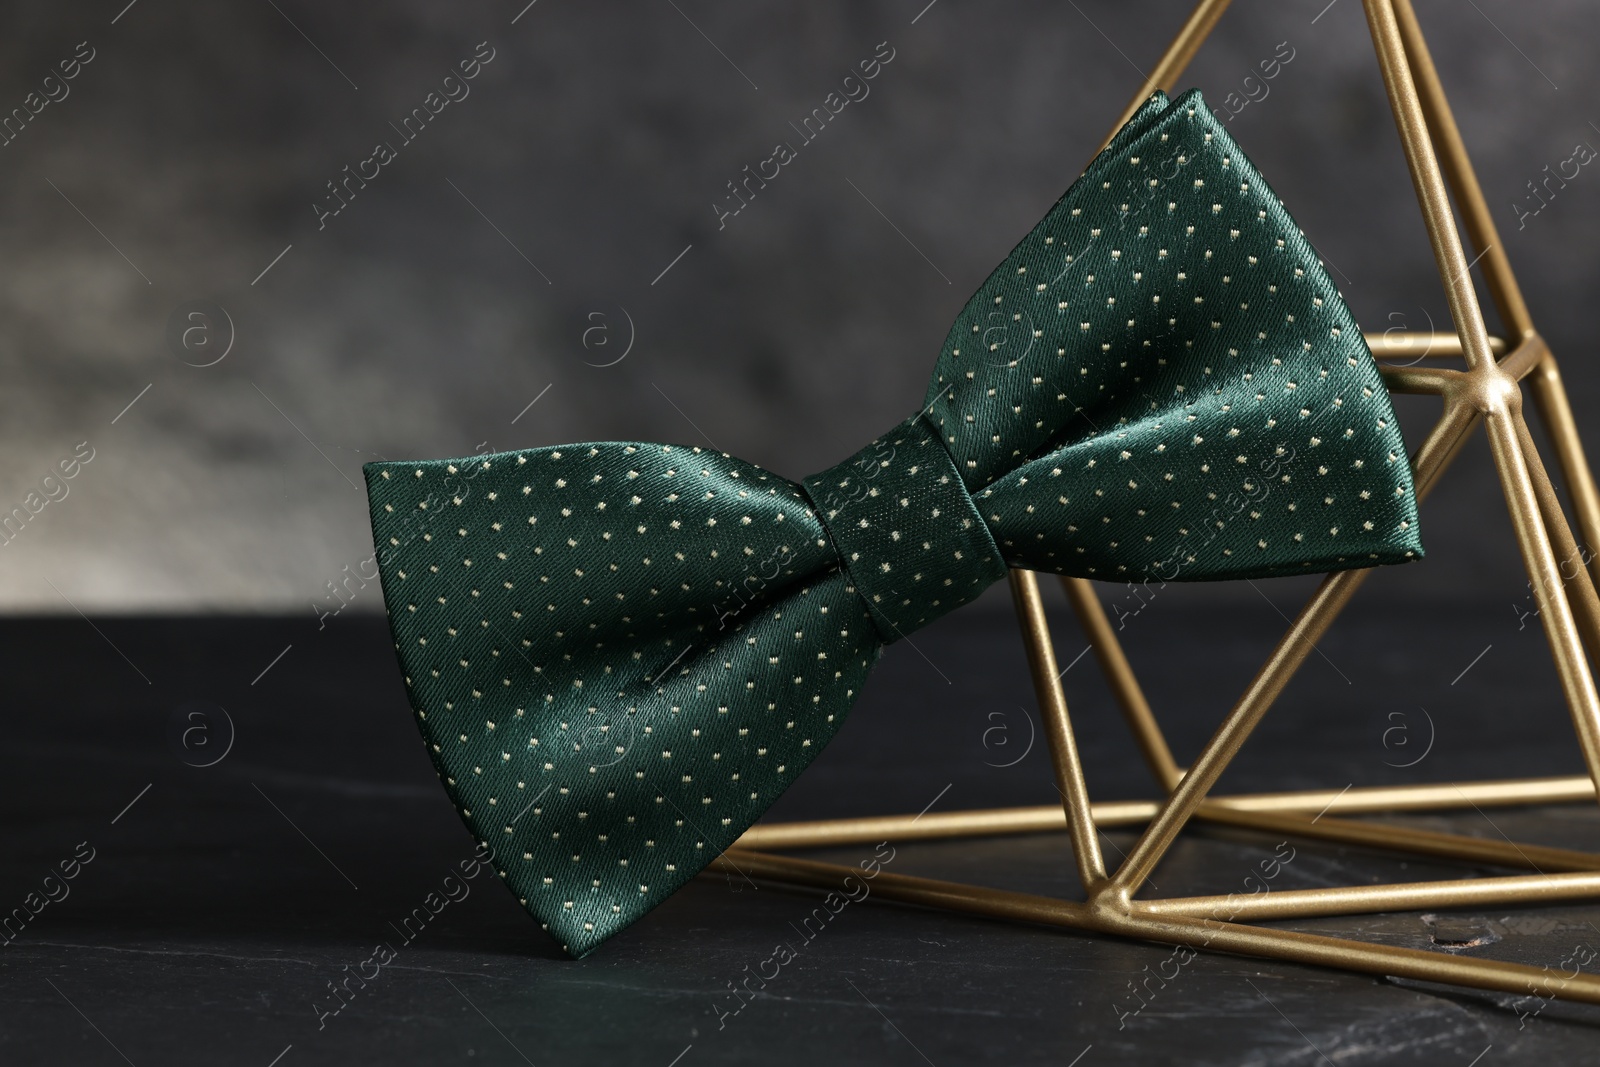 Photo of Stylish presentation of green bow tie on black table against gray background